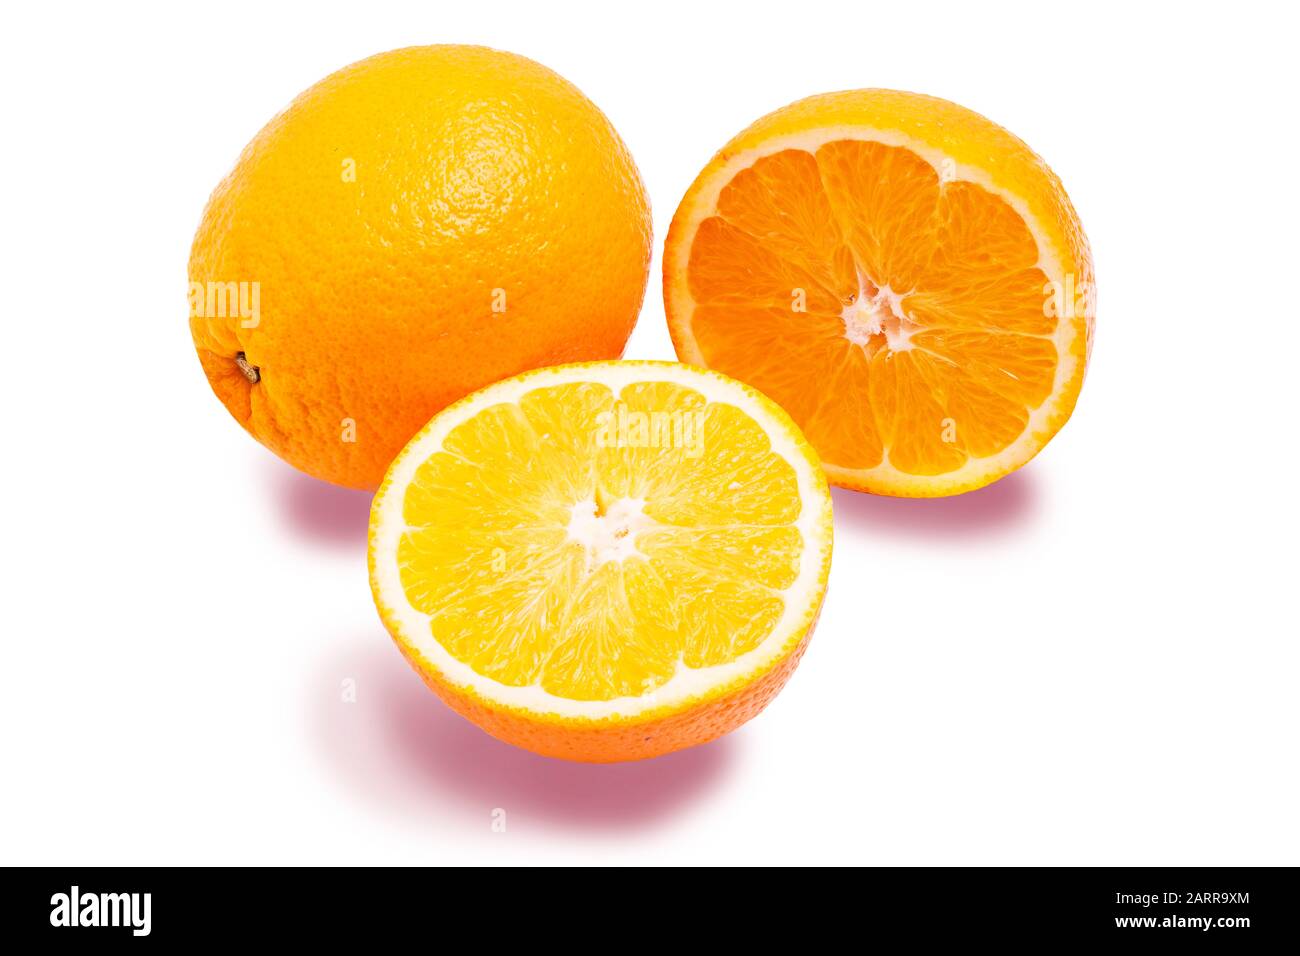 fresh oranges isolated on a white background with shadow Stock Photo